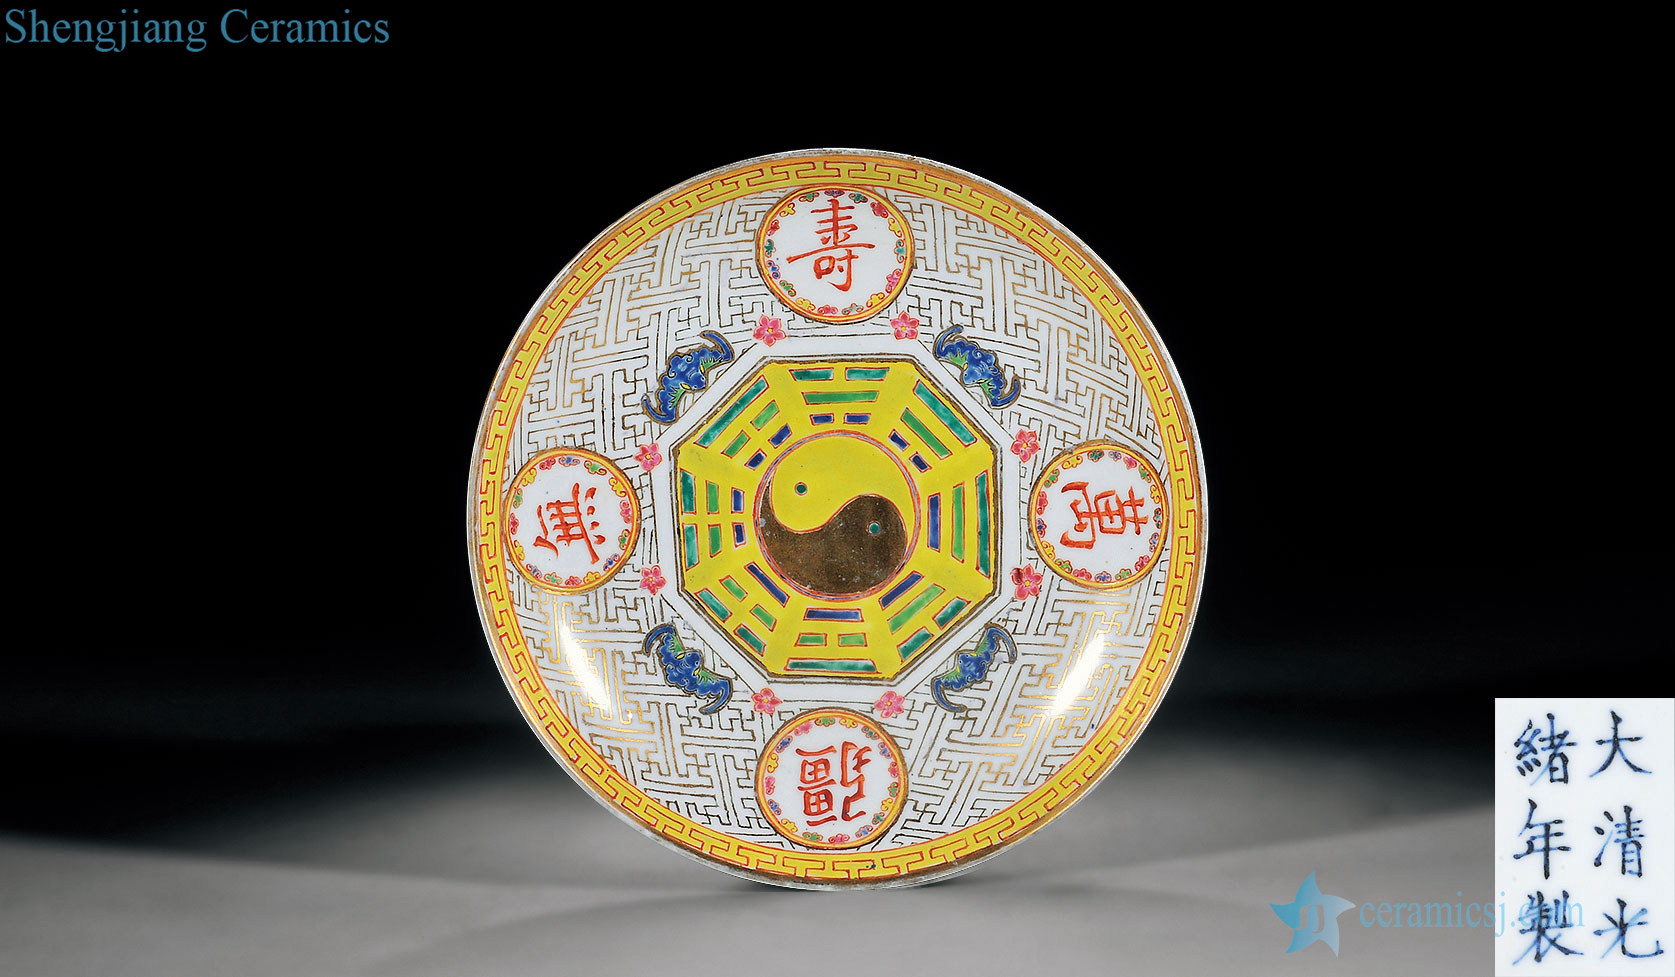 In the reign of qing emperor guangxu pastel kam to medallion stays in present, outside the furnace jun glaze